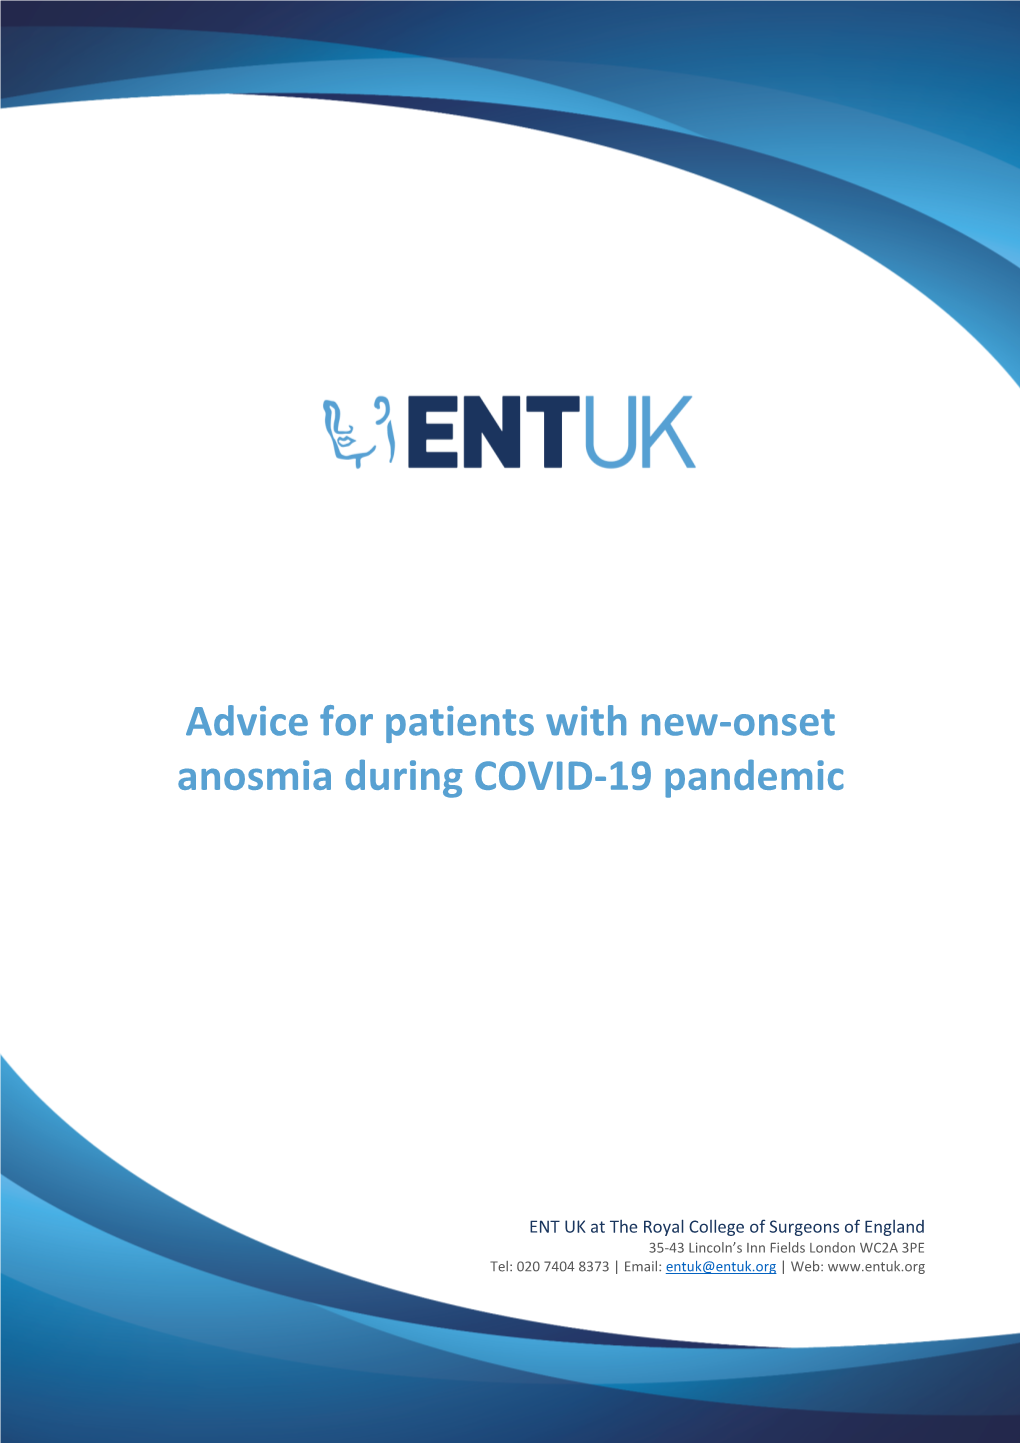 Advice for Patients with New-Onset Anosmia During COVID-19 Pandemic